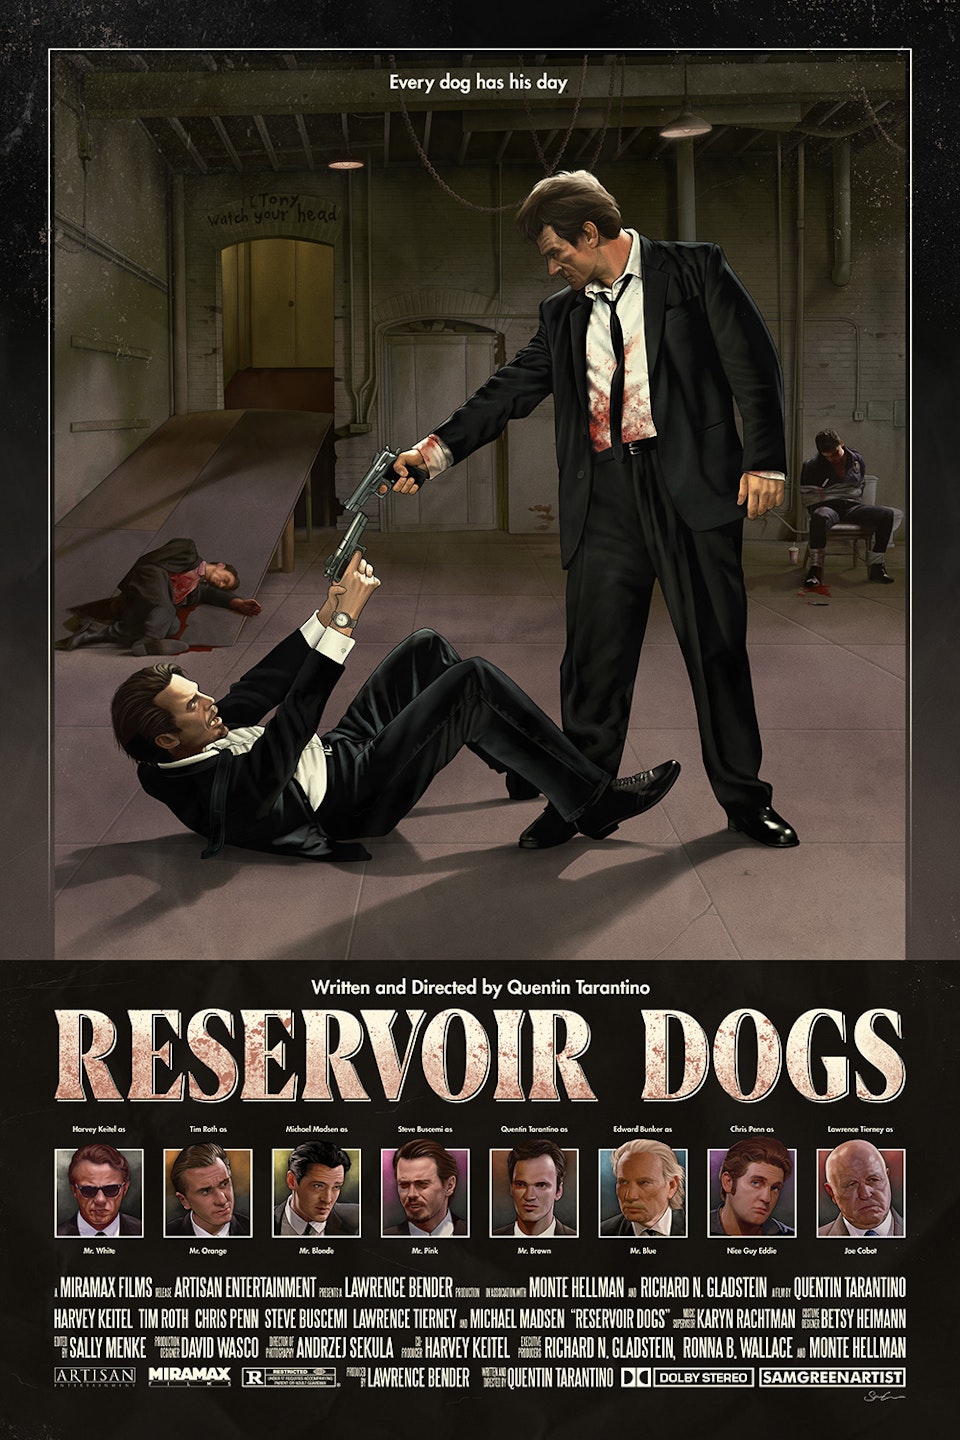 Reservoir Dogs - Reservoir Dogs Poster Illustration

Illustrated components in Procreate, Adobe Photoshop and Adobe Illustrator. Assembly in Adobe Photoshop.

Created as part of Gallery 1988's exhibition “Crazy4Cult 2021” – featuring artwork inspired by cult cinema.

Quentin Tarantino is one of my all time favourite directors, so I enjoyed the challenge of creating work to represent such a seminal piece of filmmaking. Reservoir Dogs is one of my favourite movies and I wanted to try and distill it down to one singular image as best as I could. With the majority of the movie taking place within the warehouse, similar to a stage play, I knew this would be my central location. I wanted to create a vertical slice of some of the major beats and story moments all in one scene - with the standoff between Mr. White and Mr. Pink representing the tension surrounding who is the rat. Mr. Orange bleeding out on the ramp as he is for a lot of the movie. Finally the tortured police officer strapped to a chair after being attacked by Mr. Blonde in the iconic scene. On the floor around him you will find references to this scene in the form of the police officers ear, Mr. Blonde's straight razor and his soda cup.